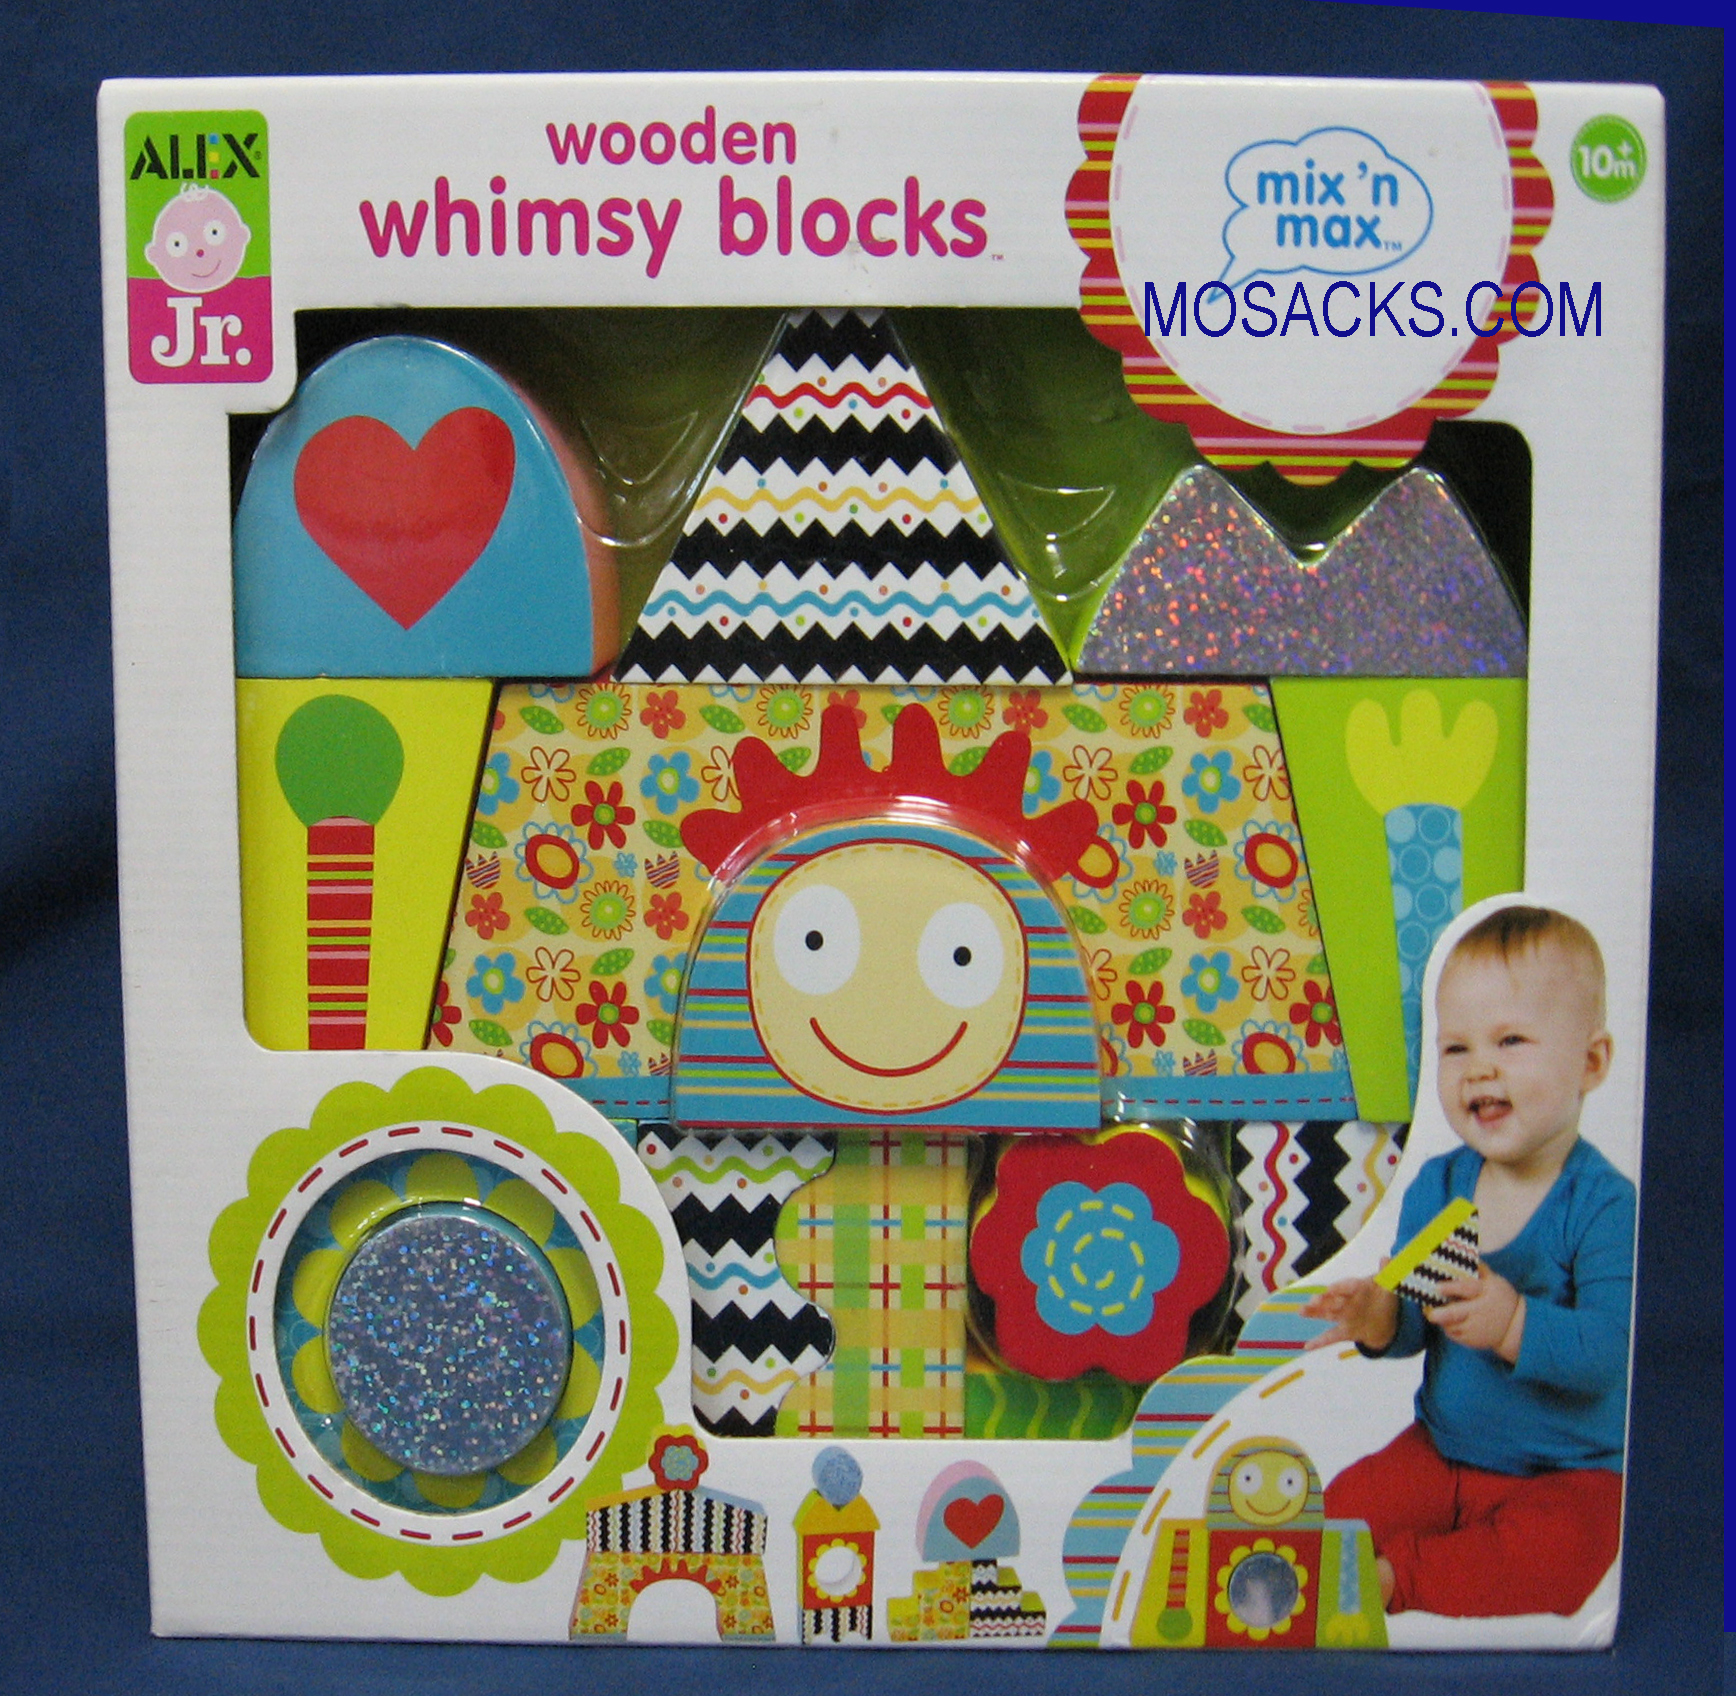 Mix N Match Wooden Whimsy Blocks Toy Age 10m+ 0731346197900